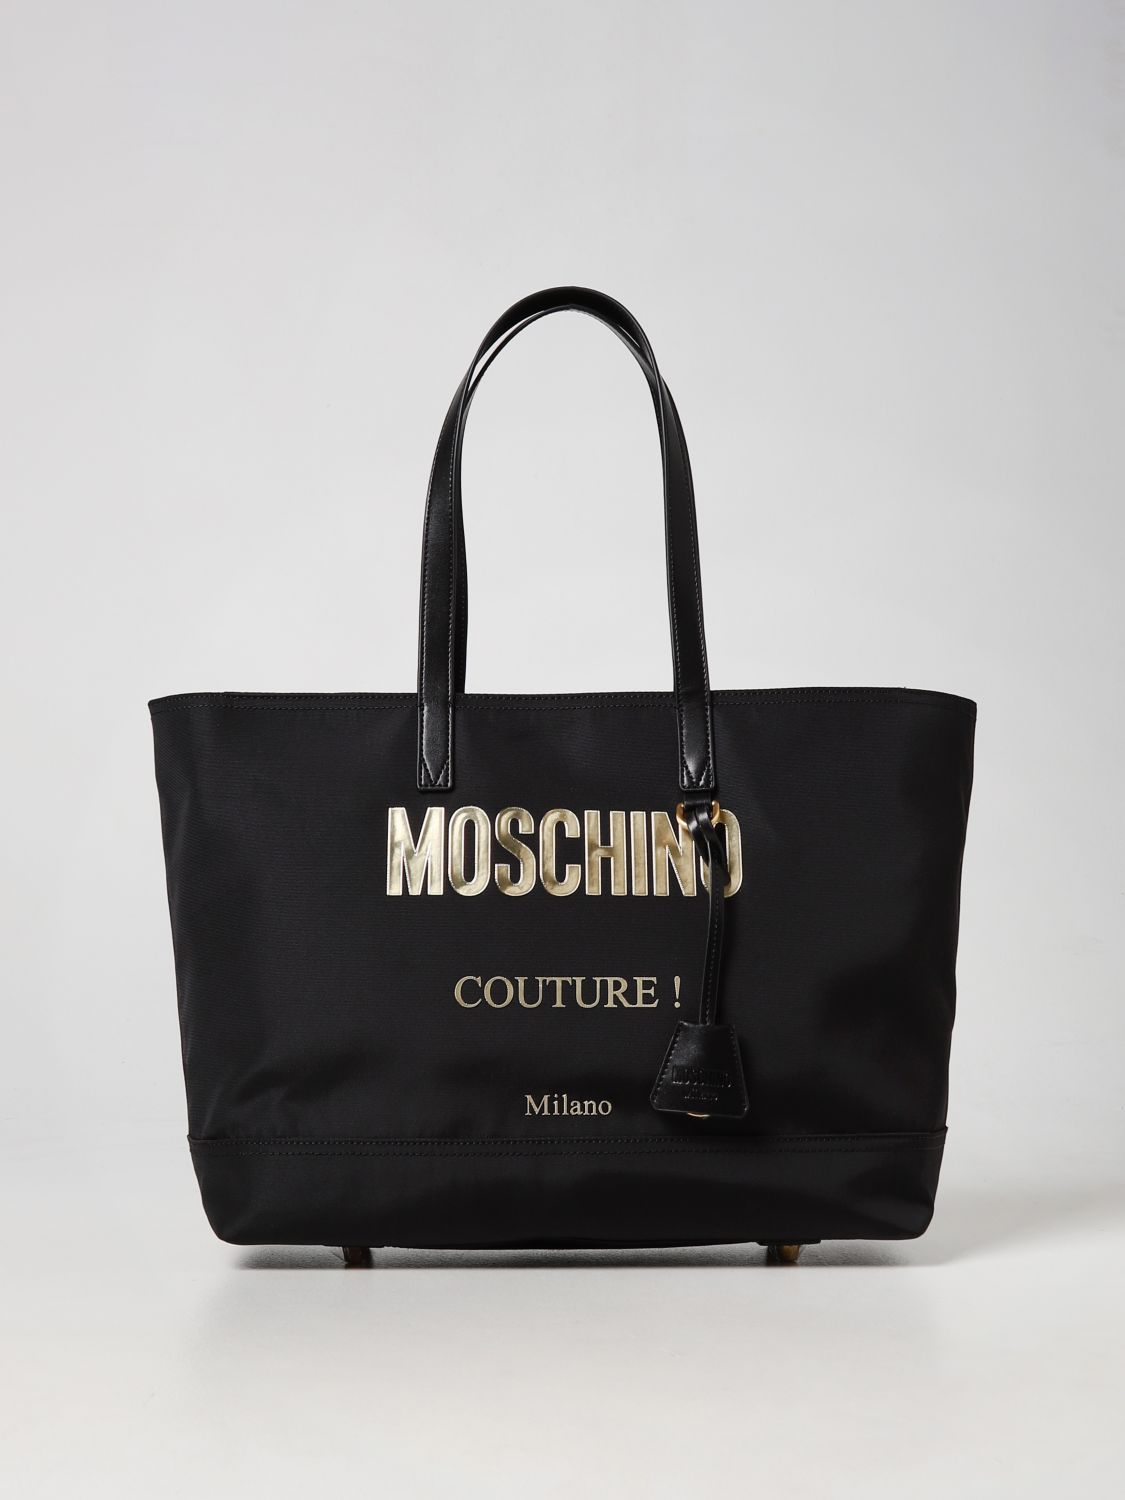 MOSCHINO COUTURE: fabric and leather bag - Black | Moschino Couture ...